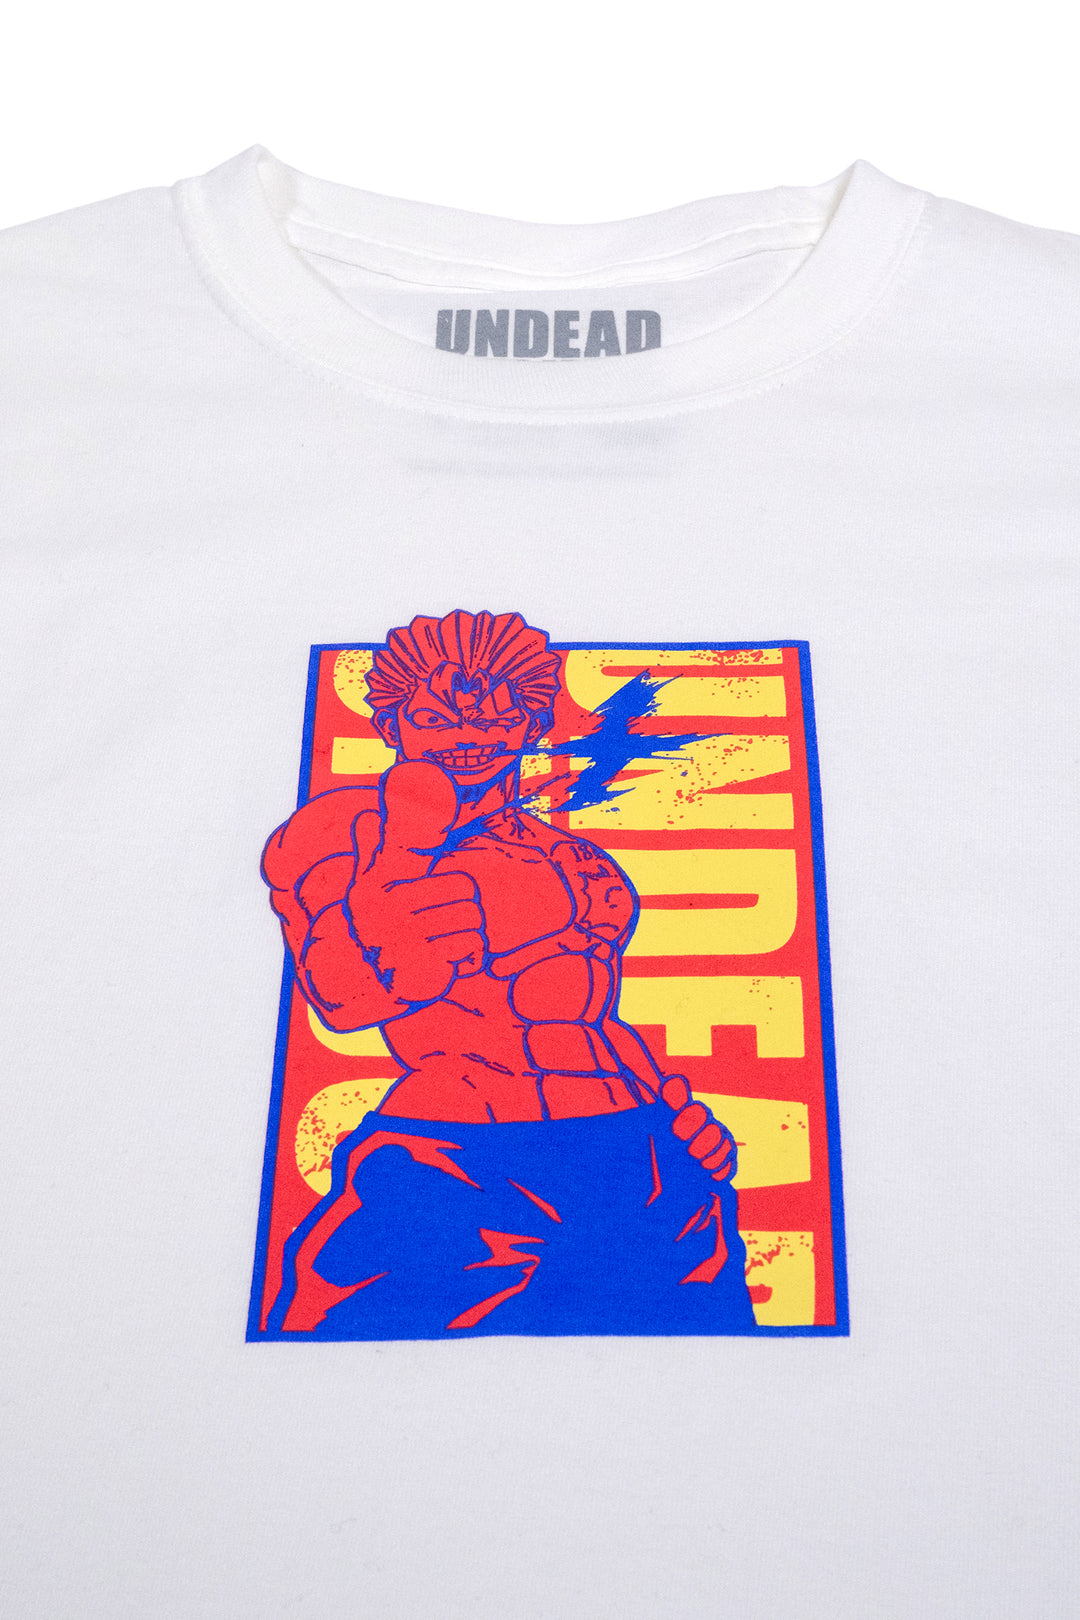 Undead Unluck Andy Box Logo Tee - White